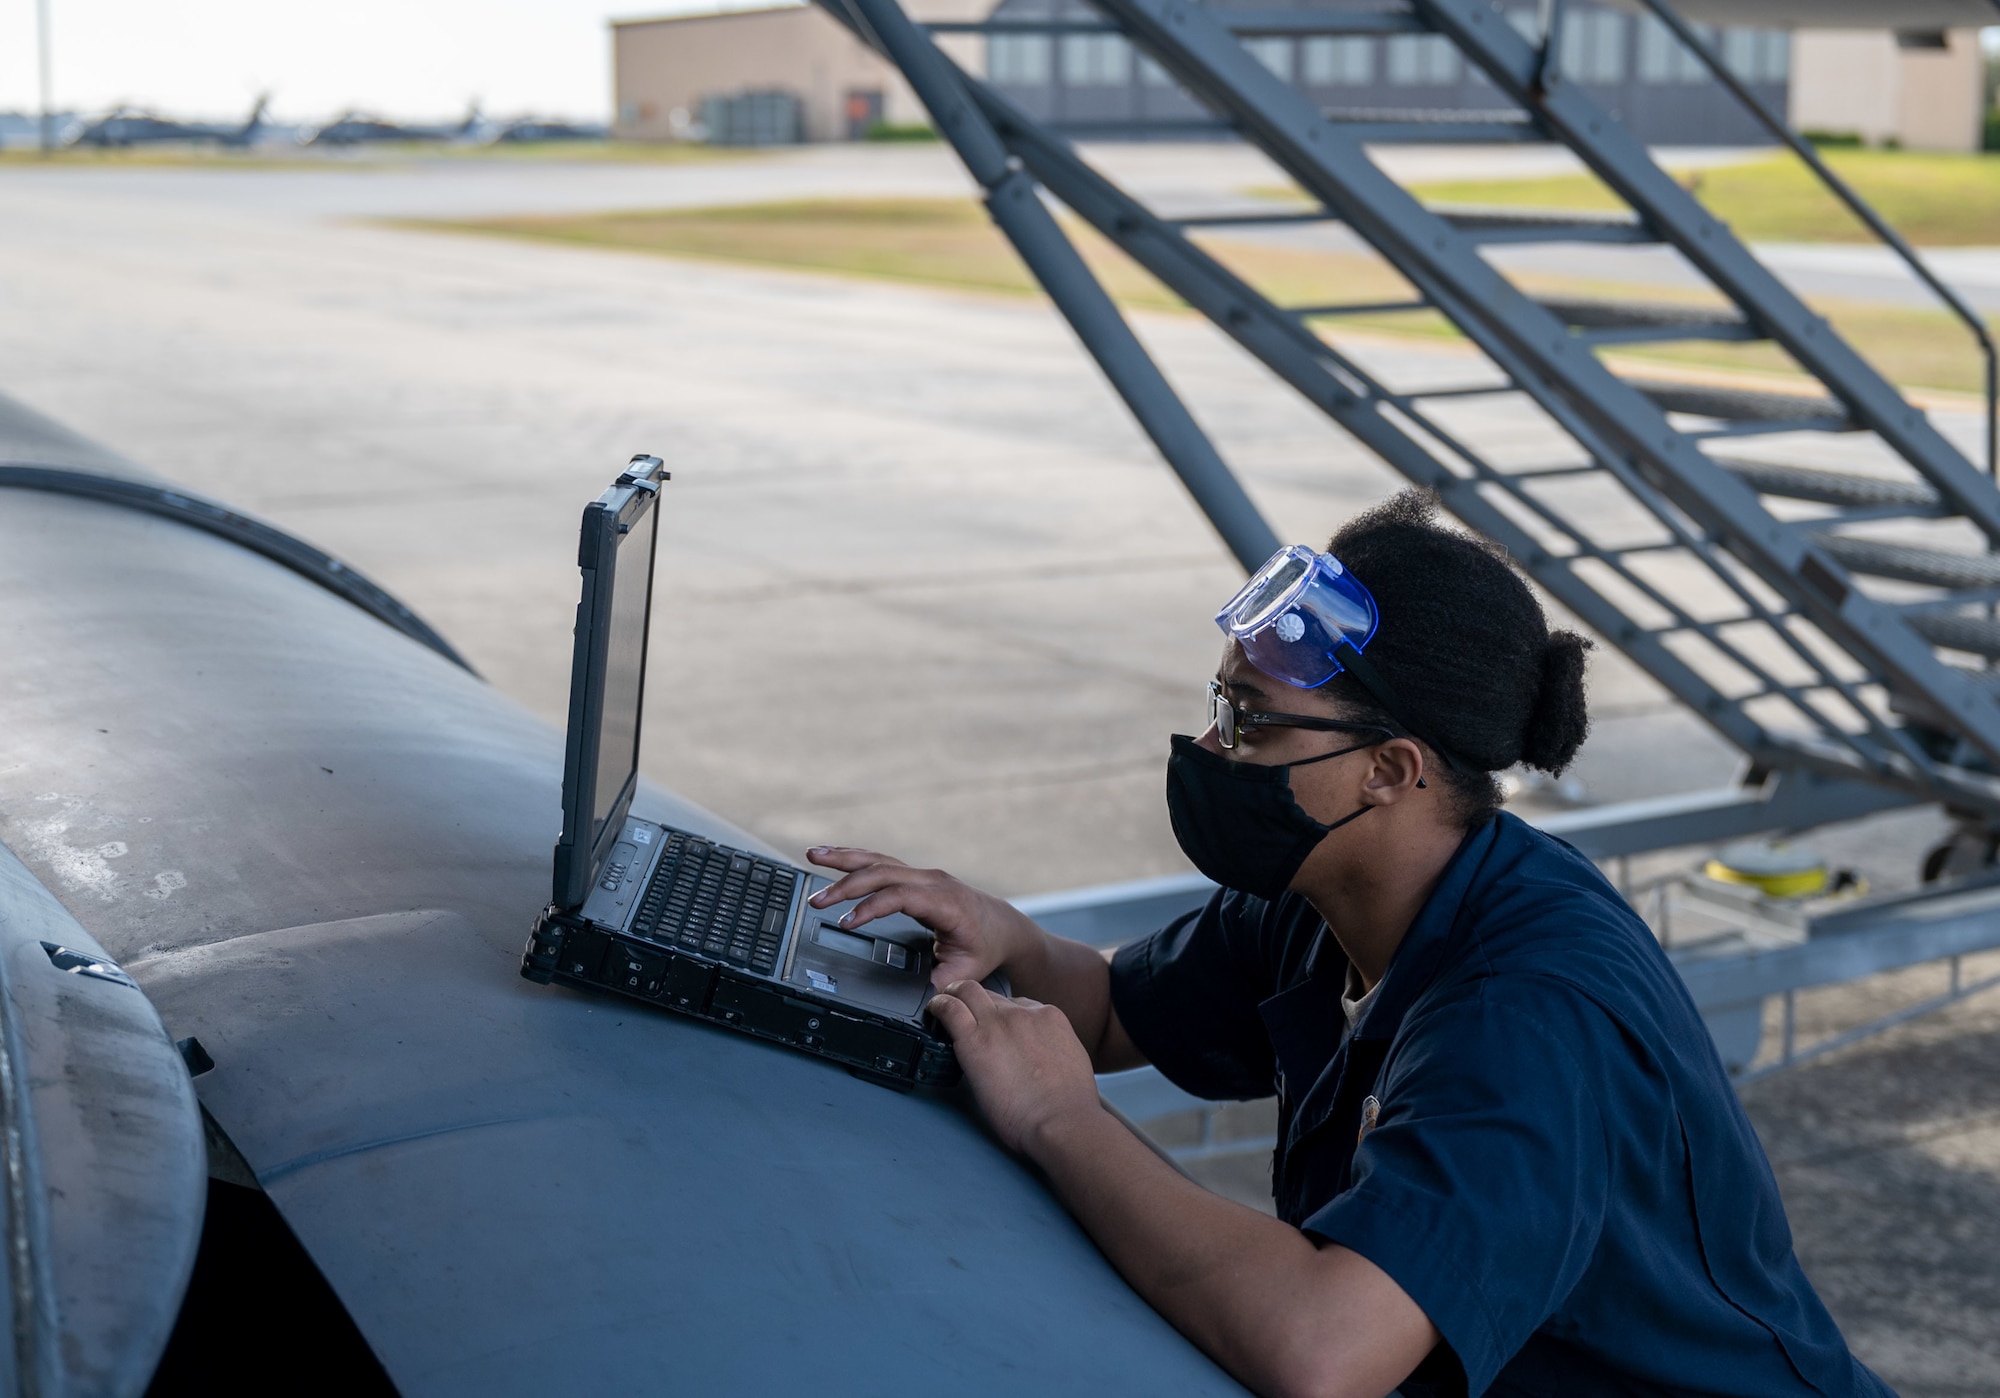 Airman 1st Class Adrienne Jones, 436th Maintenance Squadron fuels journeyman, researches maintenance solutions next to a Dover Air Force Base C-17 Globemaster III at Moody AFB, Georgia, Feb, 28, 2021. Aircrew from the 3rd Airlift Squadron identified a faulty plug housing on the C-17 following the completion of Exercise Mosaic Tiger. A three-Airmen Maintenance Recovery Team from Dover AFB was alerted and mobilized within 24 hours. The MRT, along with the flying crew chief assigned to the C-17, coordinated parts and tools from Joint Base Charleston, South Carolina, to ensure the successful return of the aircraft to Dover AFB. (U.S. Air Force photo by Airman 1st Class Faith Schaefer)